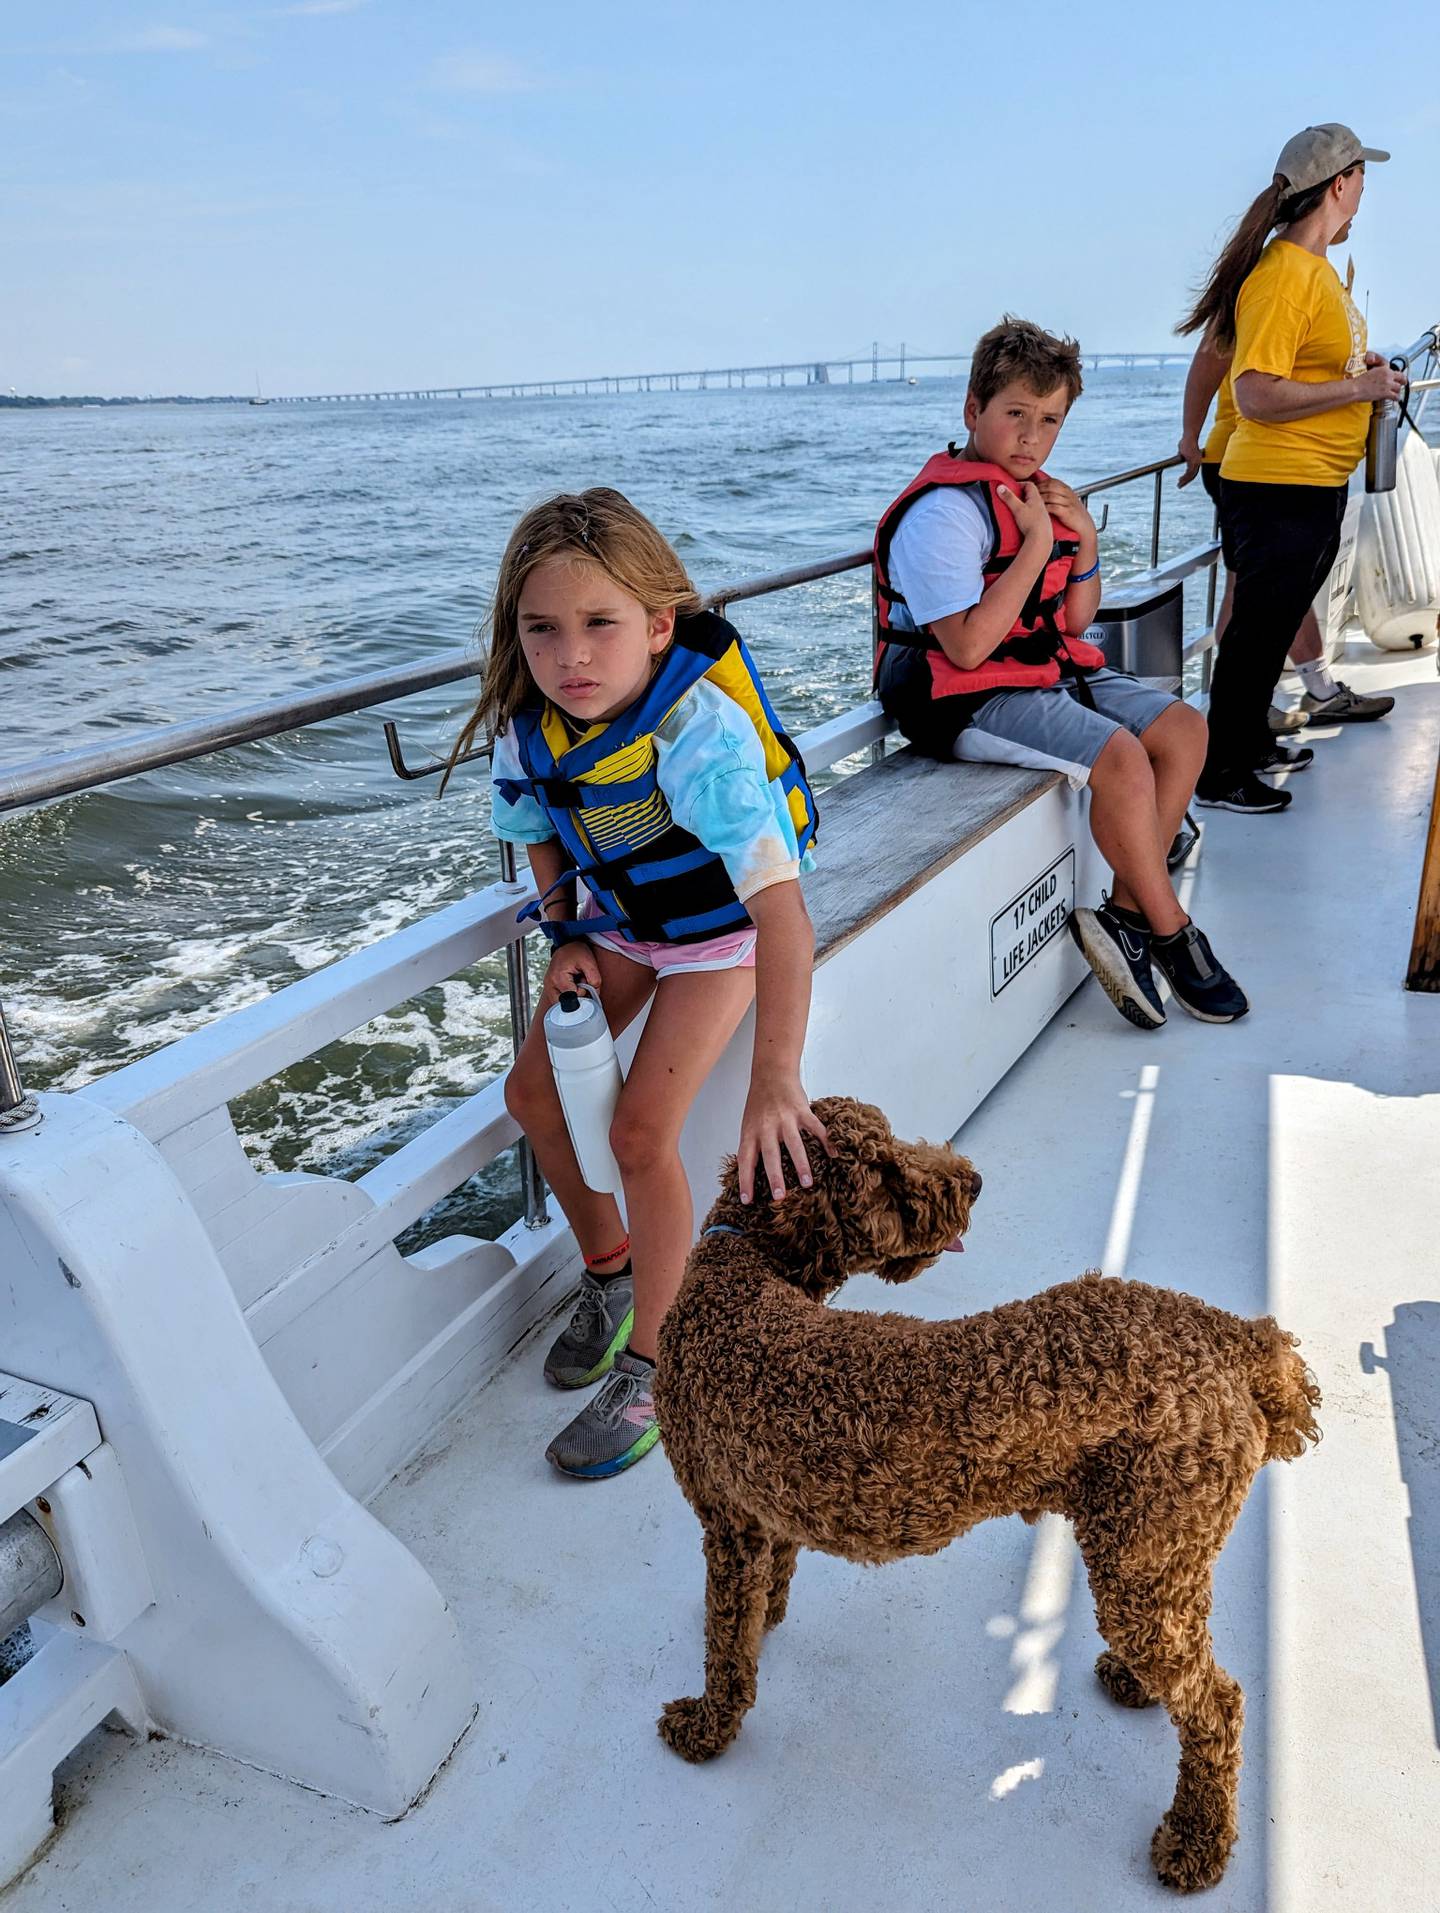 Pearl, one of the summer campers aboard the Wilma Lee, reaches out to Ollie, a moyen poodle who serves as the official boat dog for the historic skipjack.